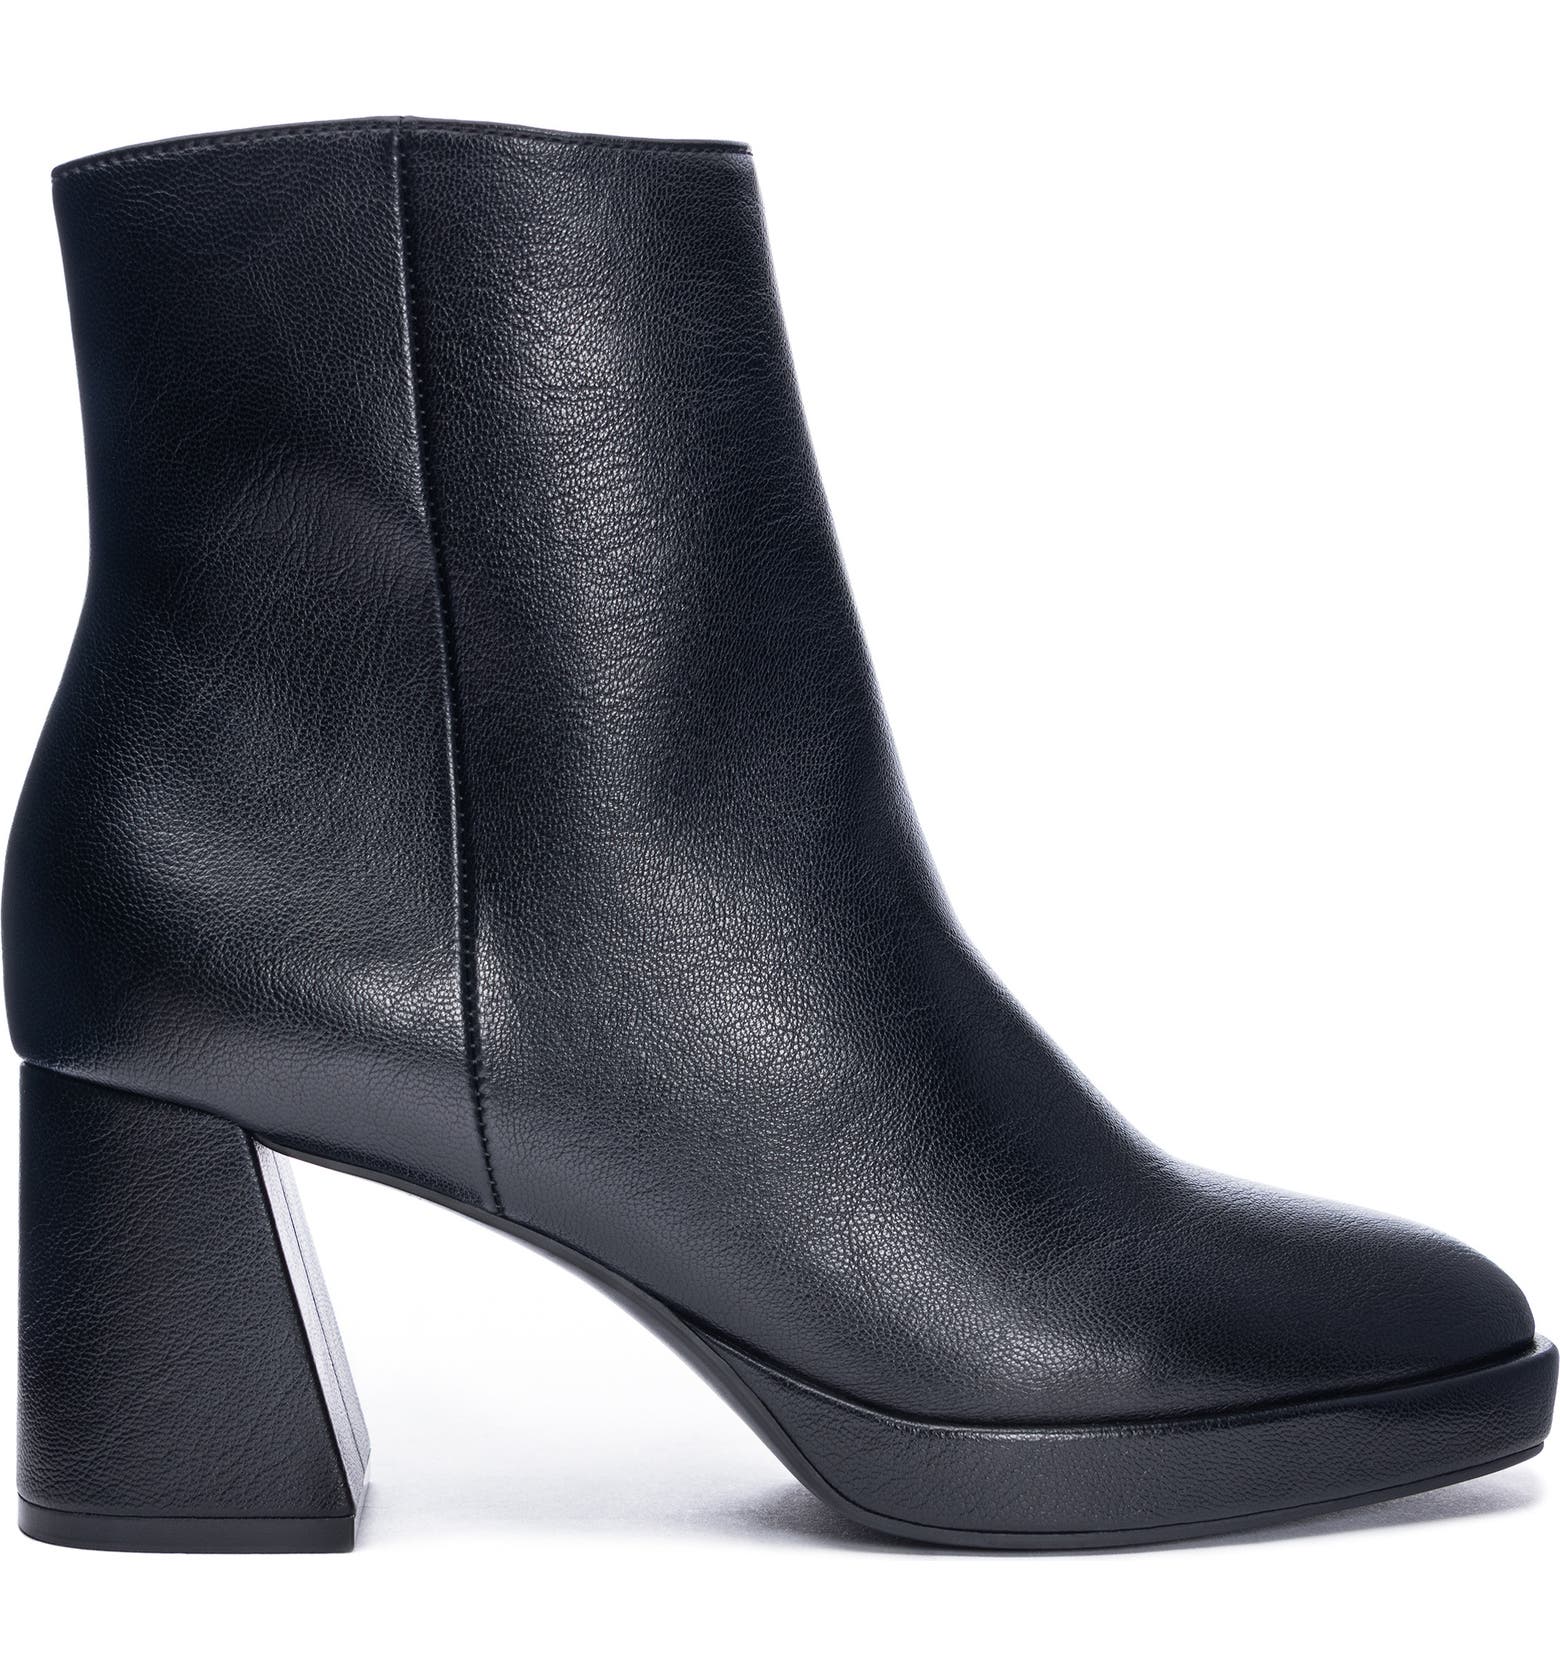 Chinese Laundry Dodger Bootie (Women) | Nordstrom